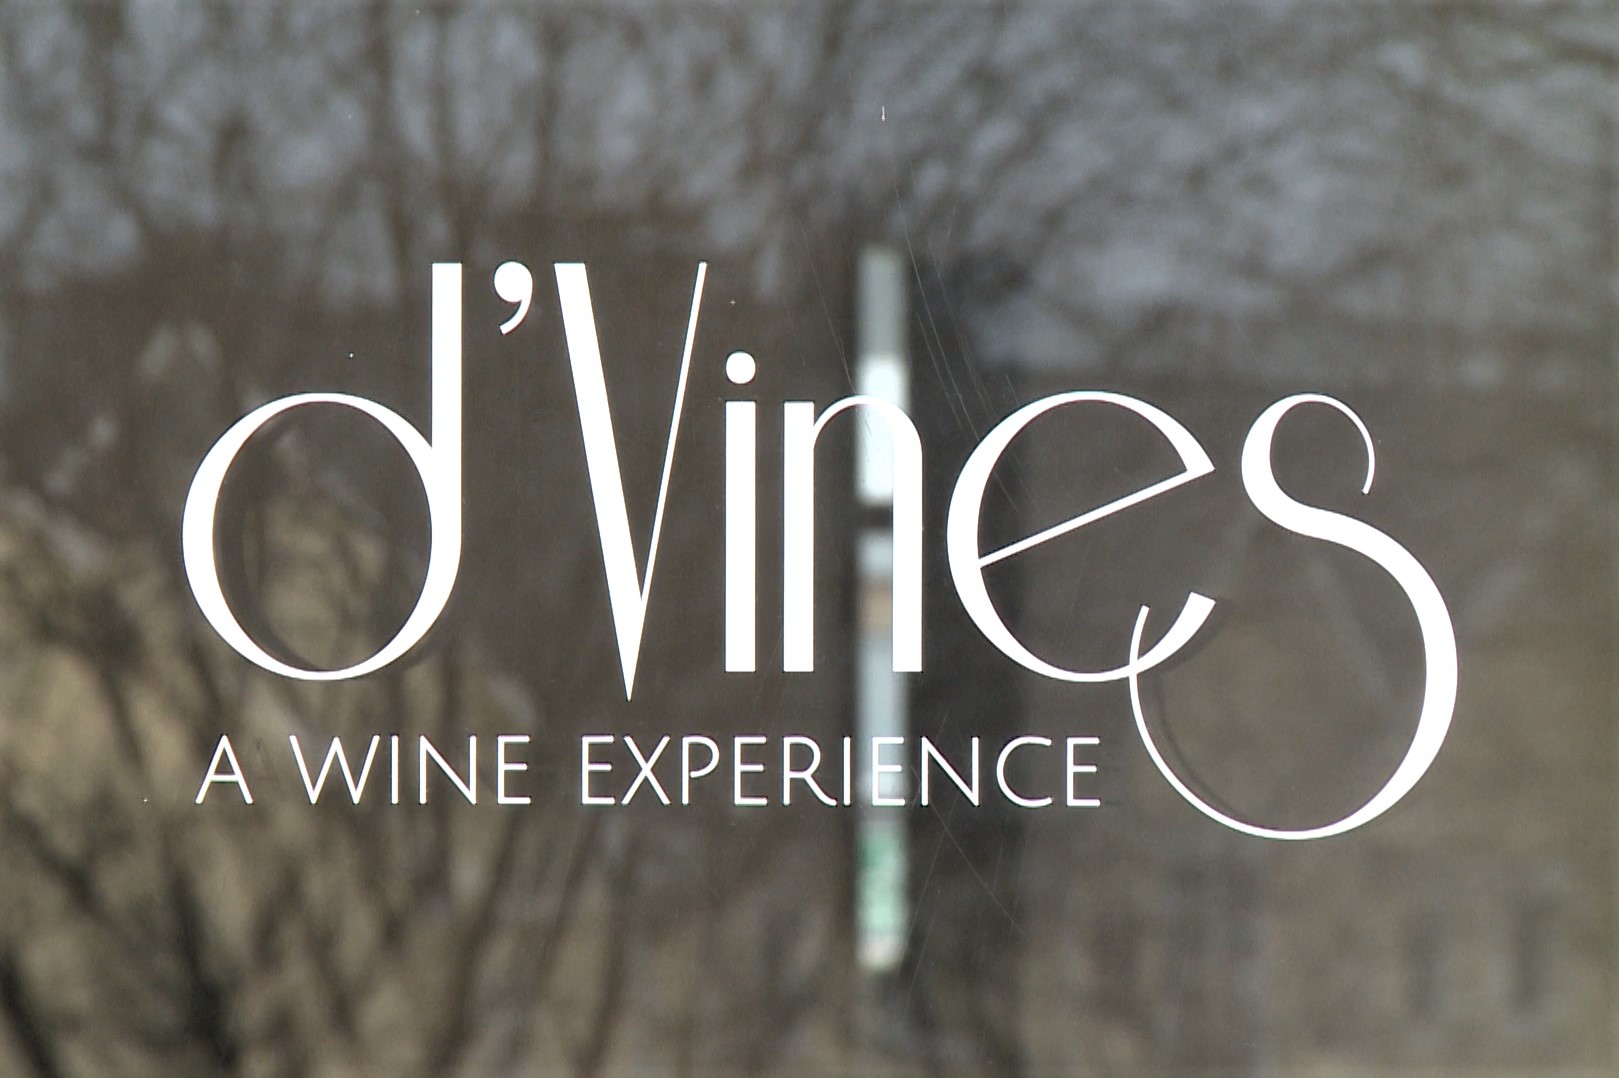 The door sign for d'Vines: A Wine Experience in Bloomington.